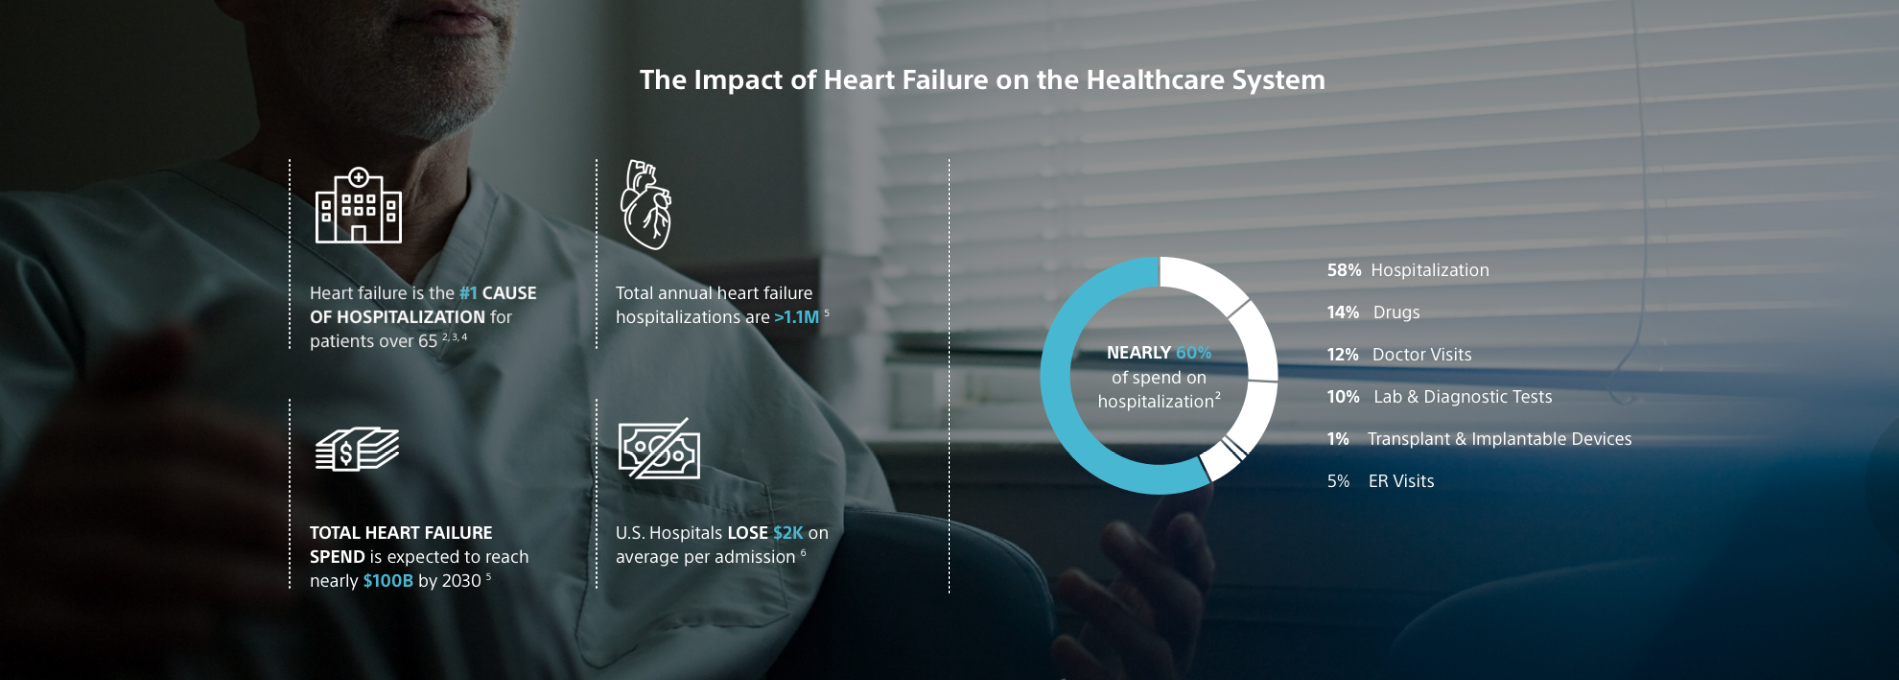 The Impact of Heart Failure on the Healthcare System